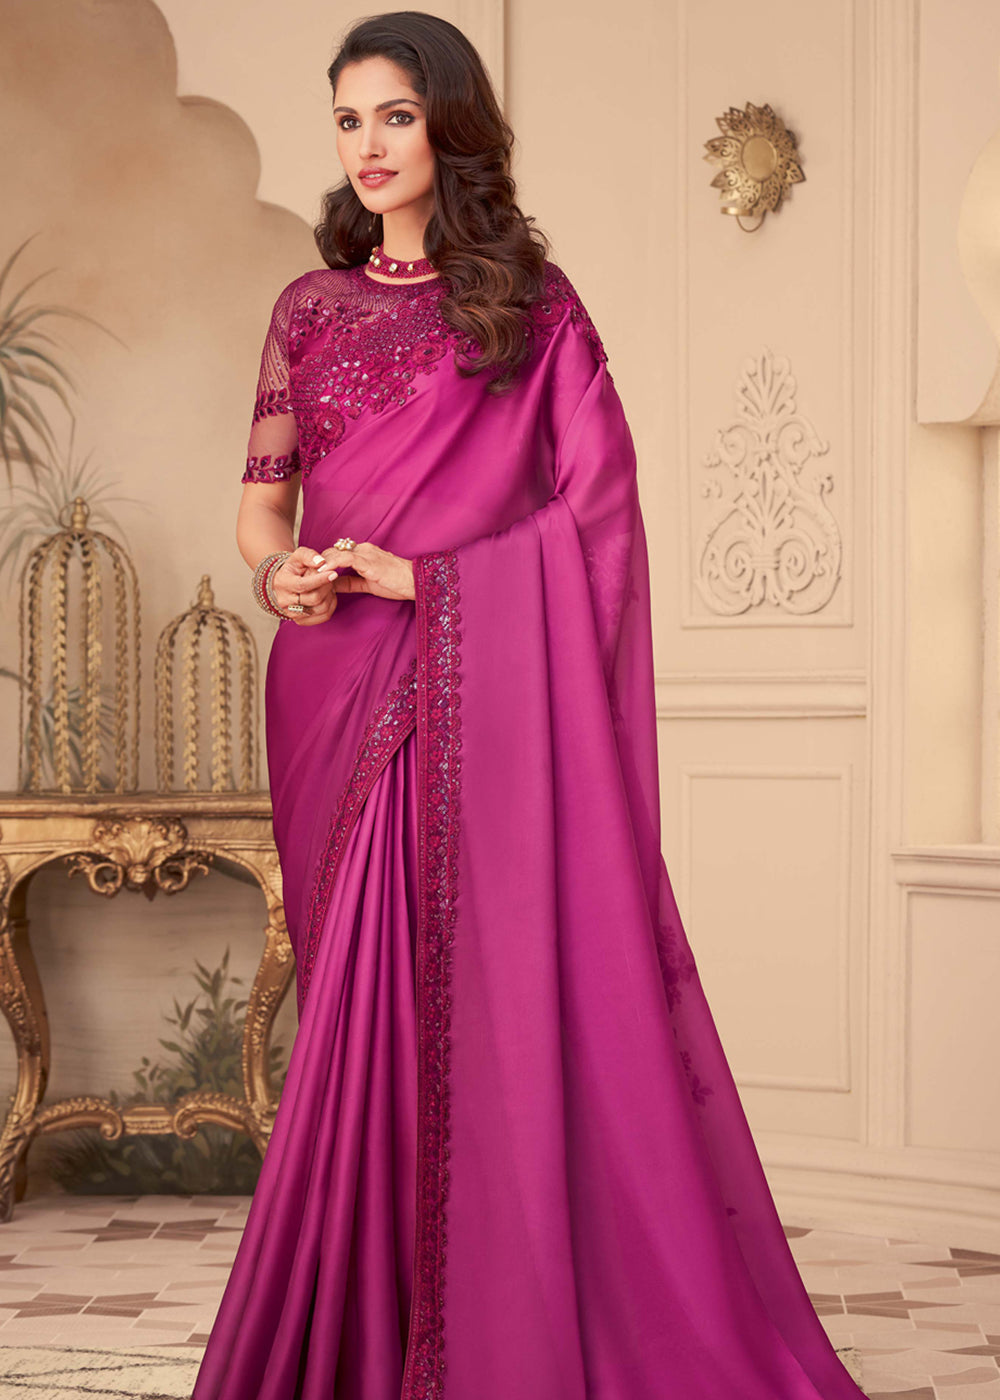 Buy MySilkLove Mystic Pearl Pink Georgette Designer Saree with Embroidered Blouse Online